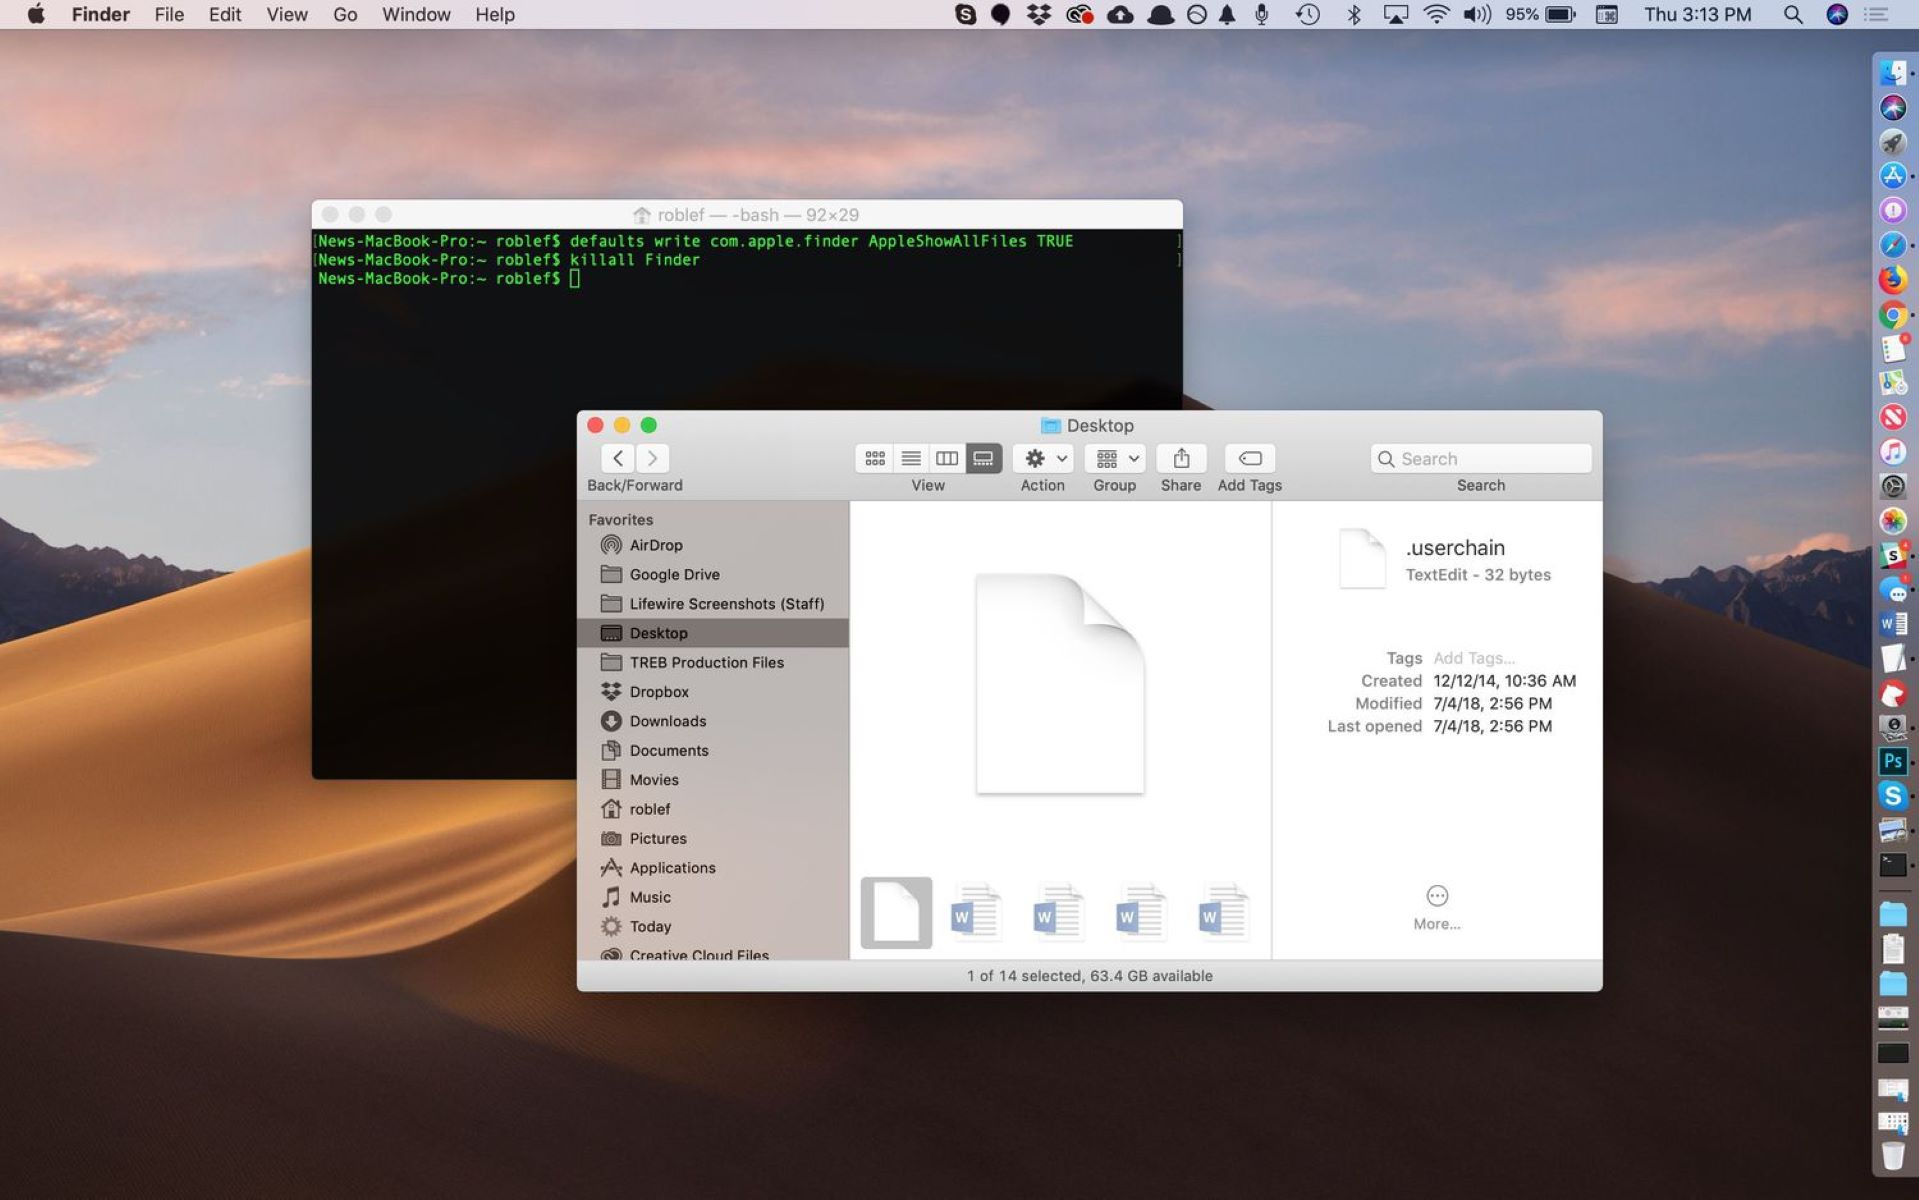 view-hidden-files-and-folders-on-your-mac-with-terminal